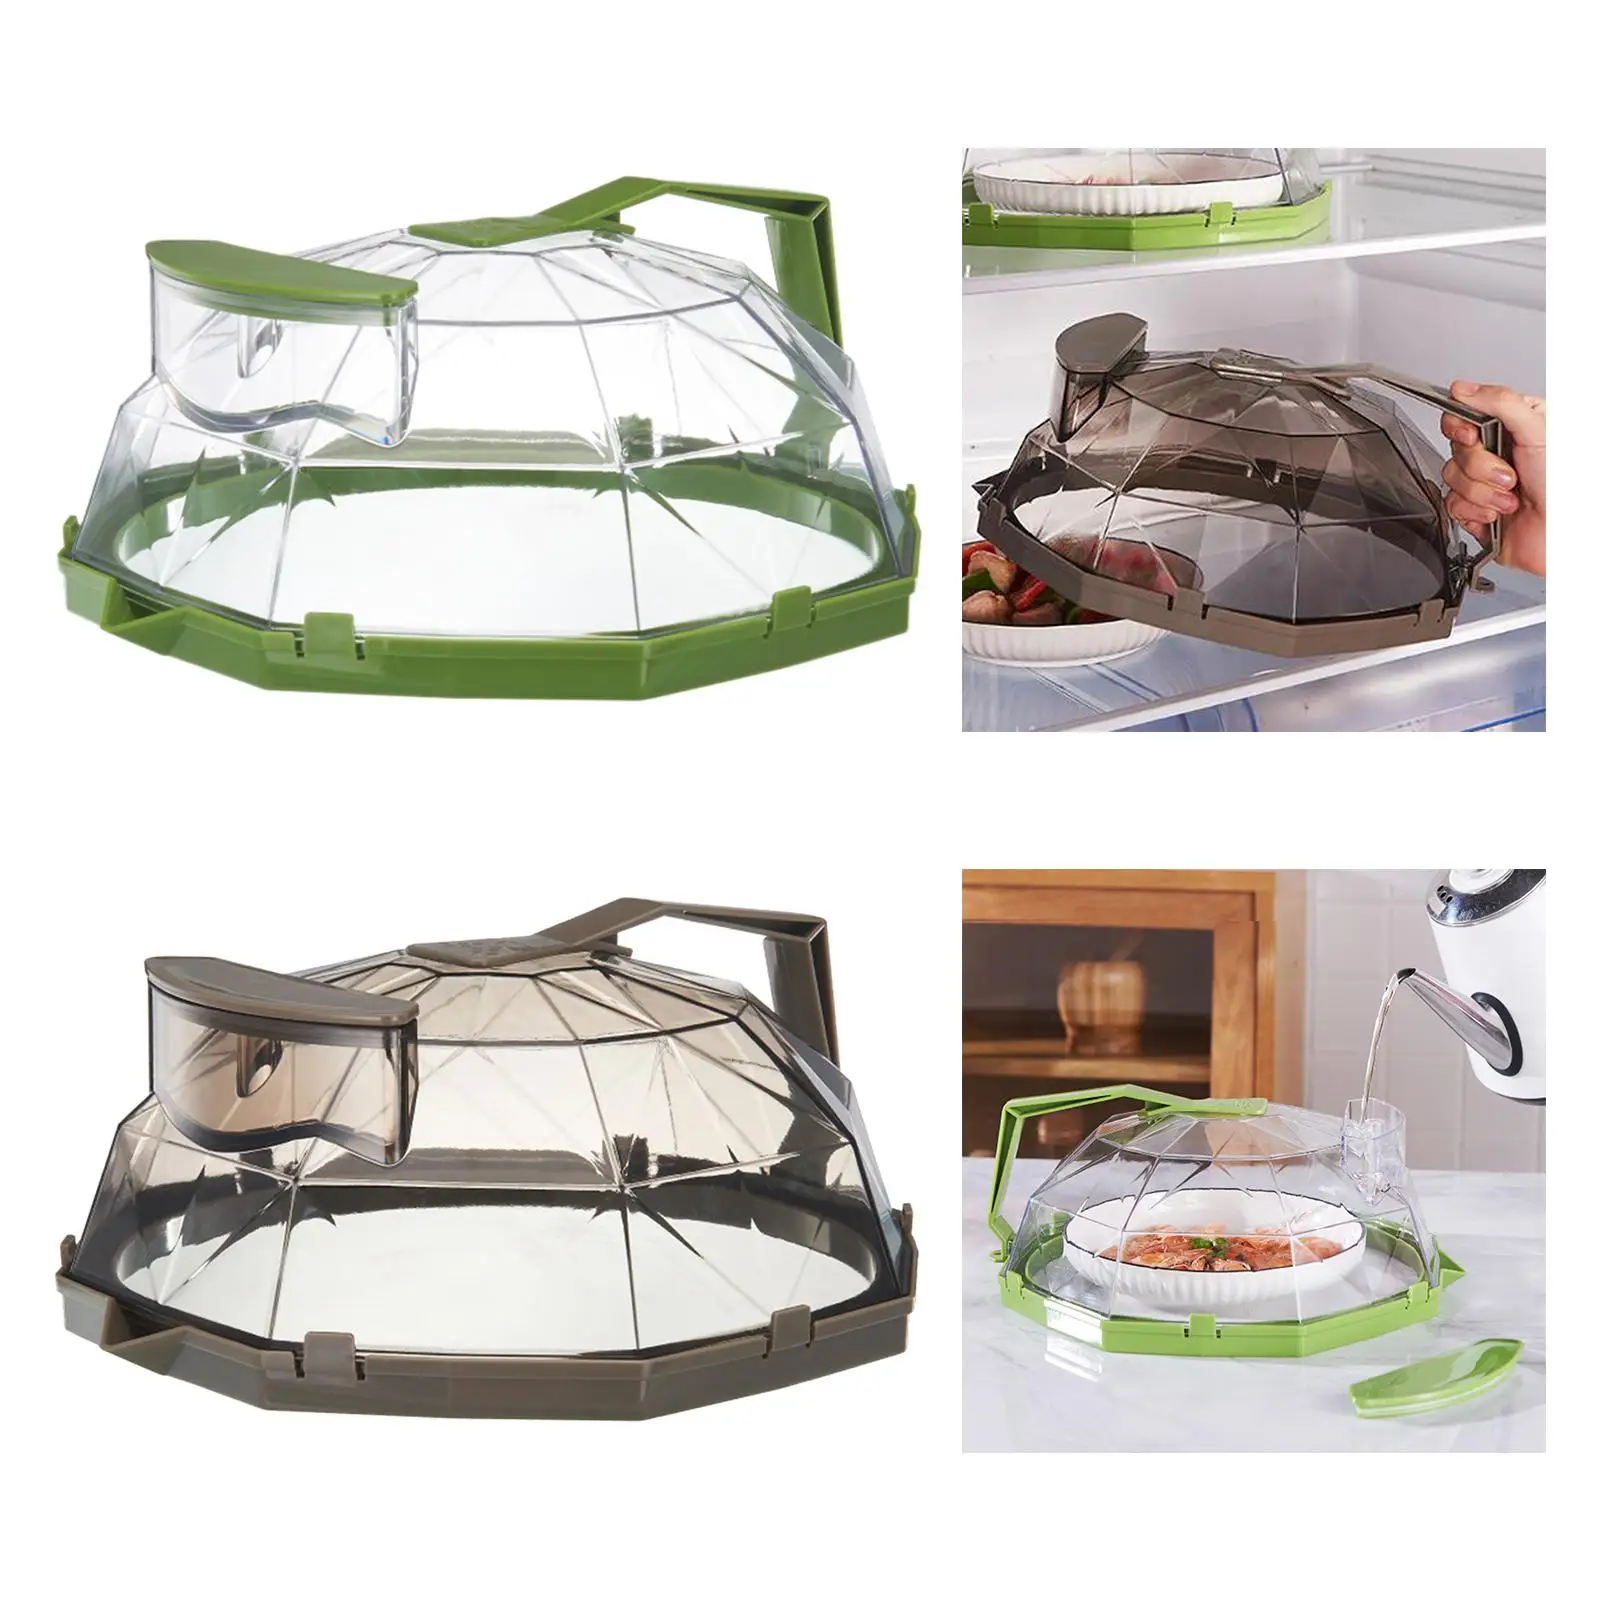 Microwave cover Lid with Water Storage Tank Top Keeping Clean Kitchen Gadget Multi Purpose Use Below 200 Celsius Degree